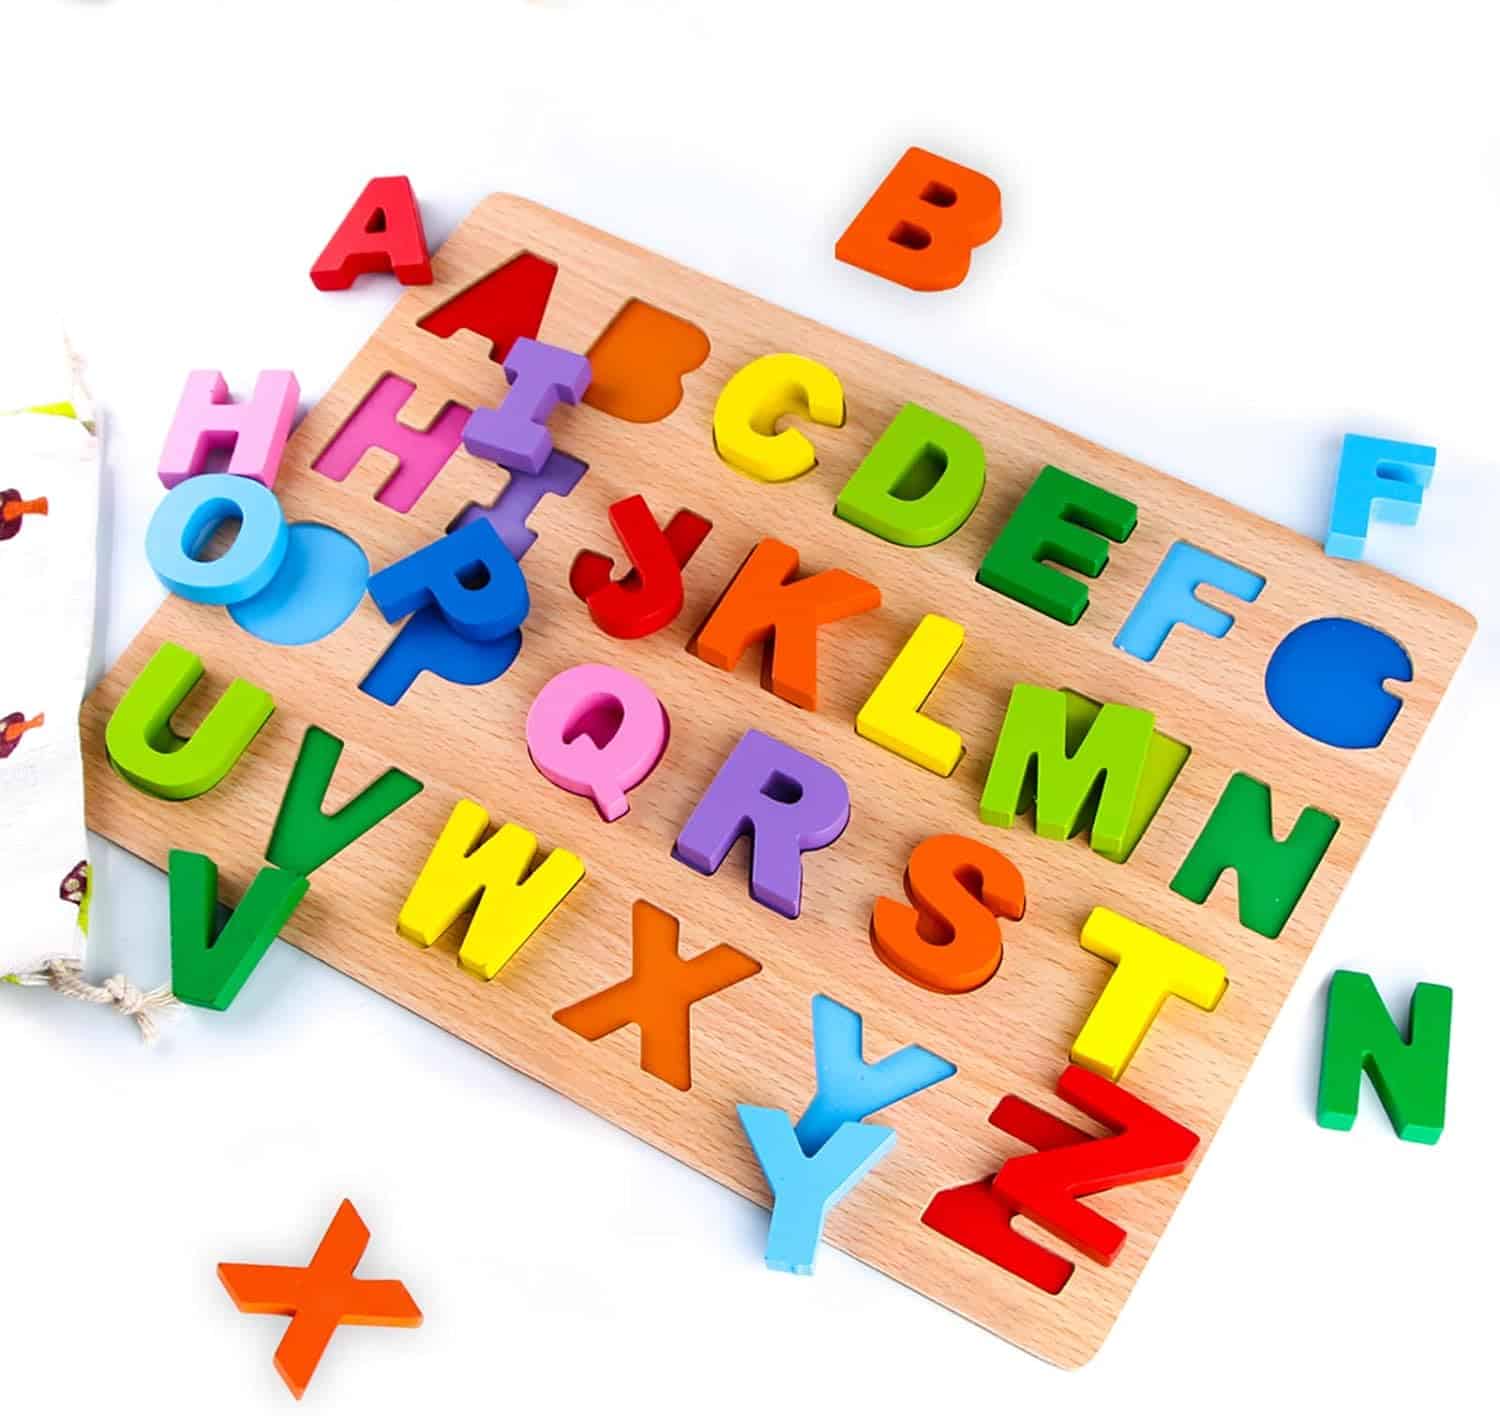 SKYFIELD Wooden Alphabet Puzzles: A Fun and Educational Toy for Kids